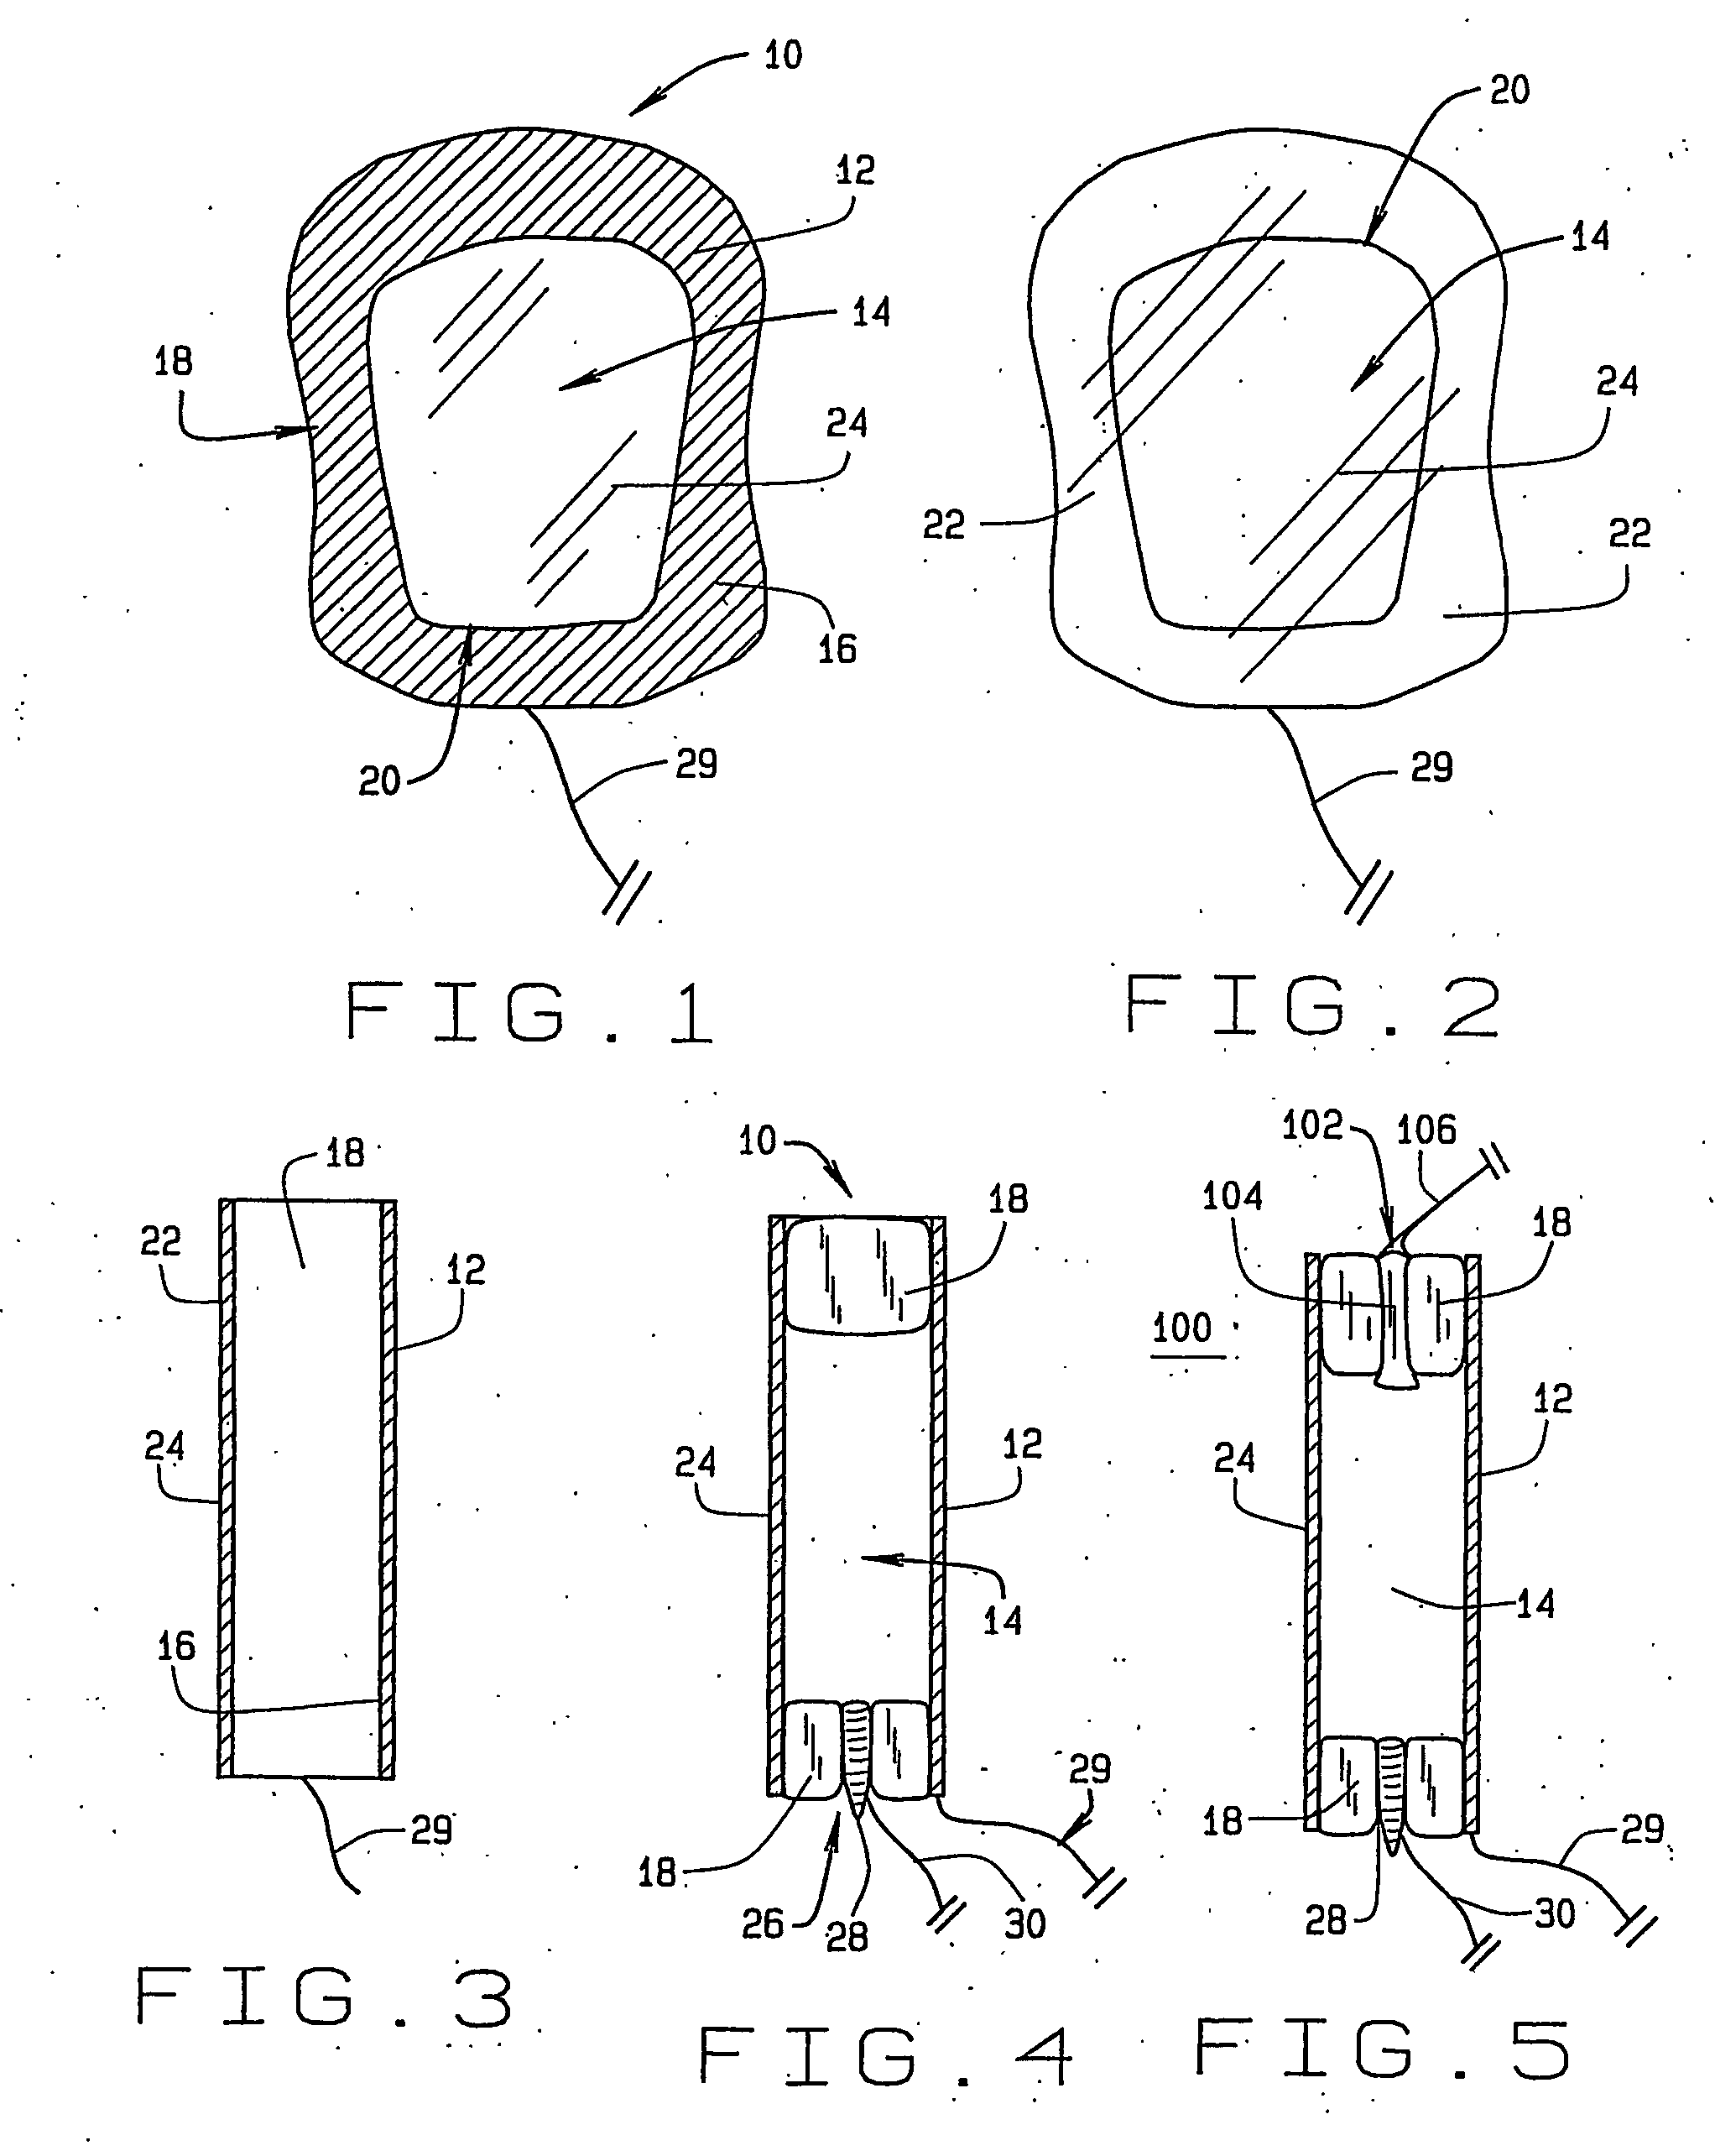 Apparatus for evoking and recording bio potentials